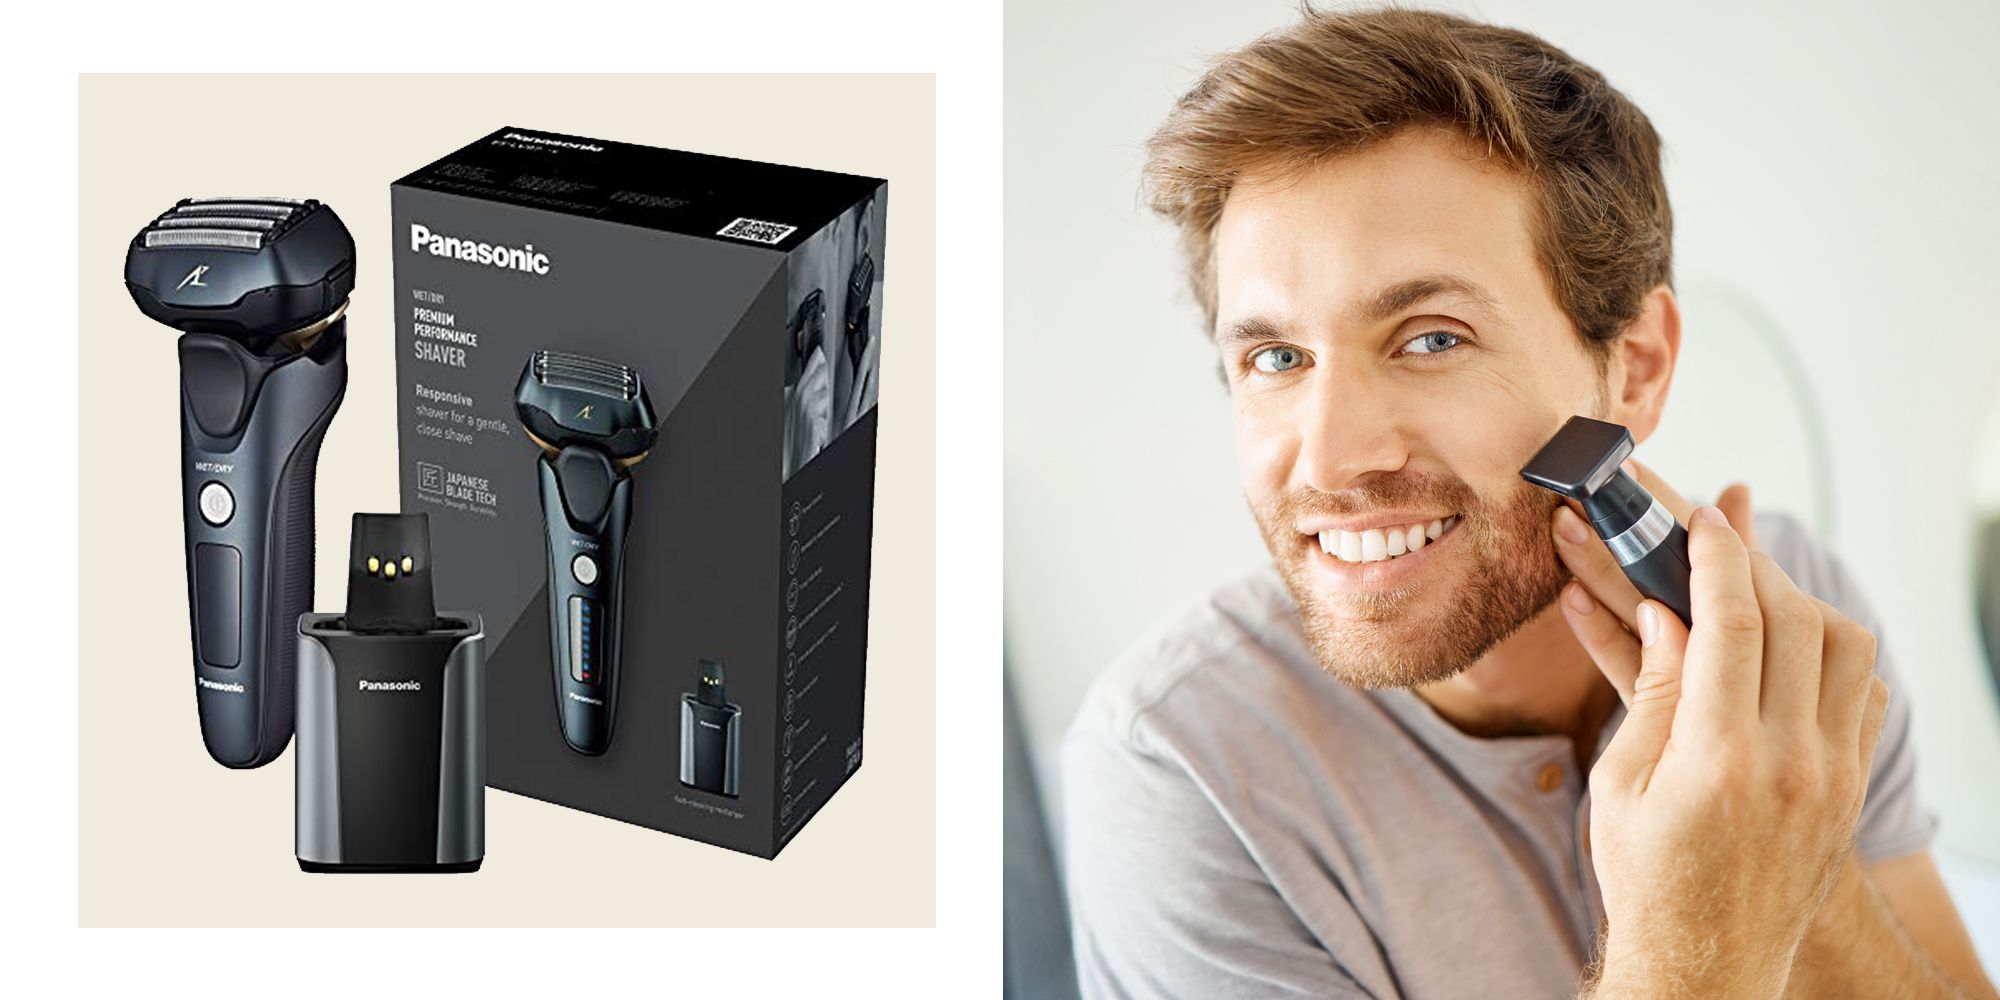 Can The Braun 3090 Really Give You a Smooth Shave: Yes, Here